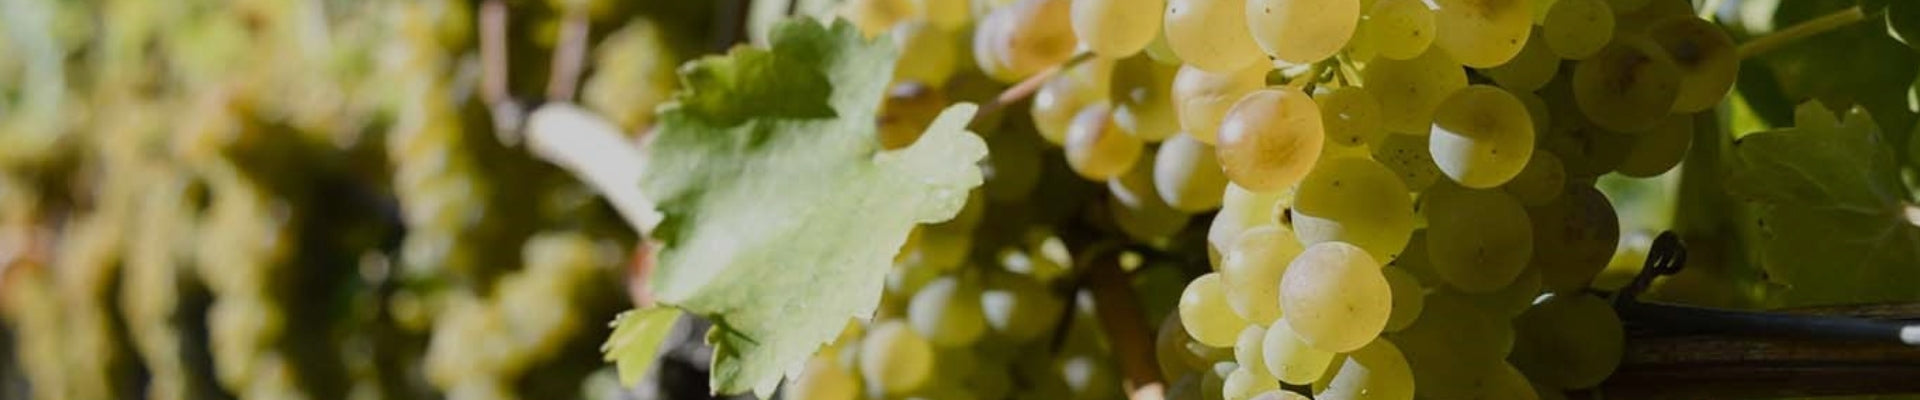 Explore our selection of Viognier wines